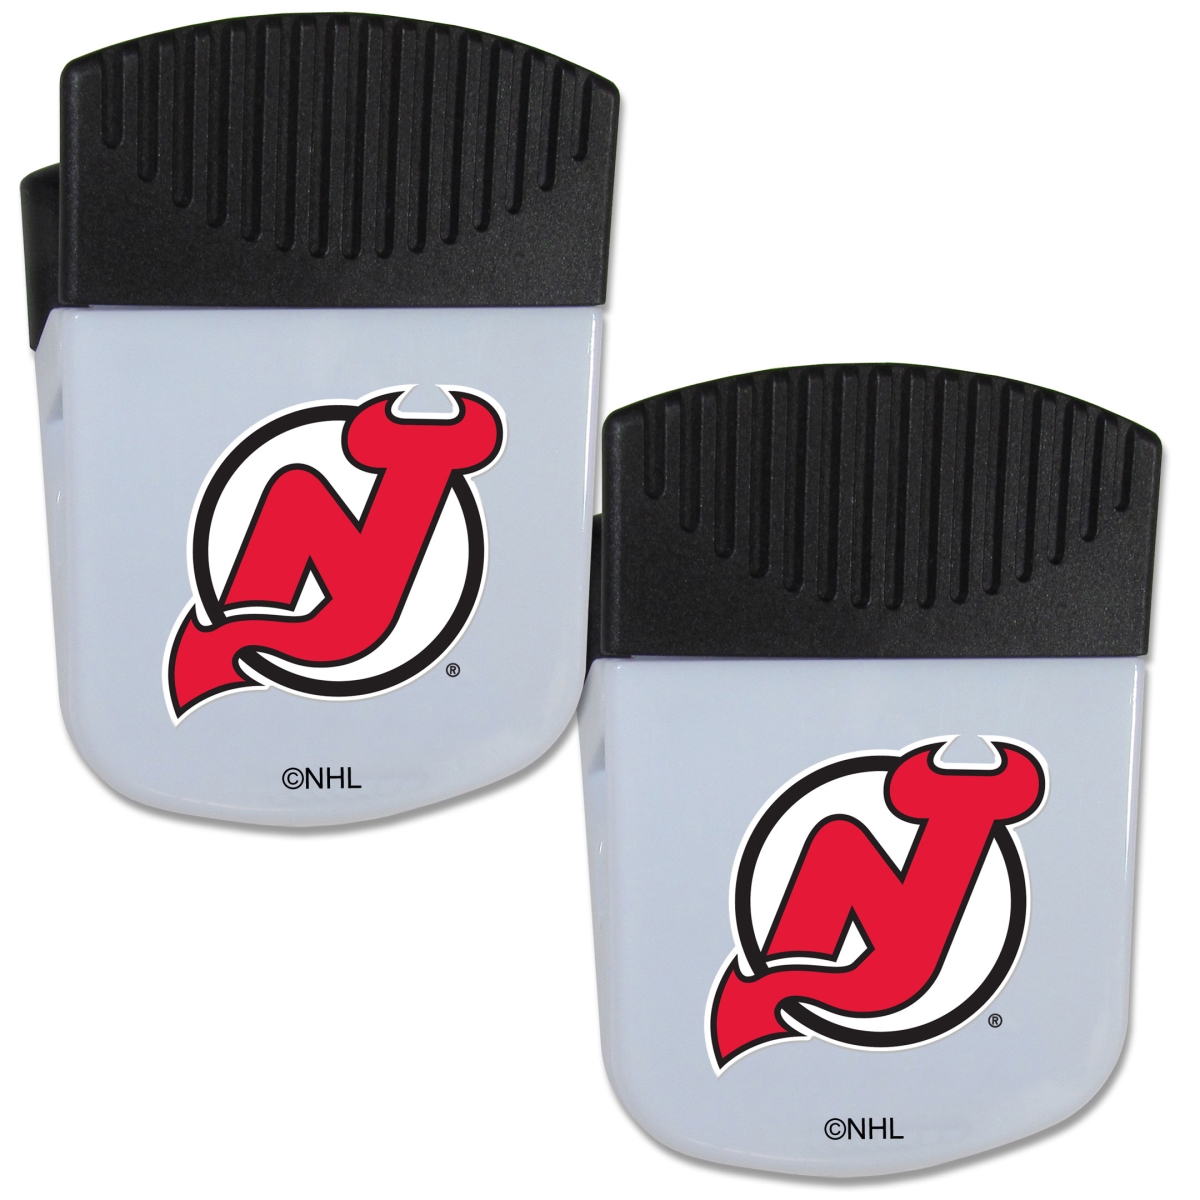 Picture of Siskiyou 2HPMC50 Unisex NHL New Jersey Devils Chip Clip Magnet with Bottle Opener - Pack of 2